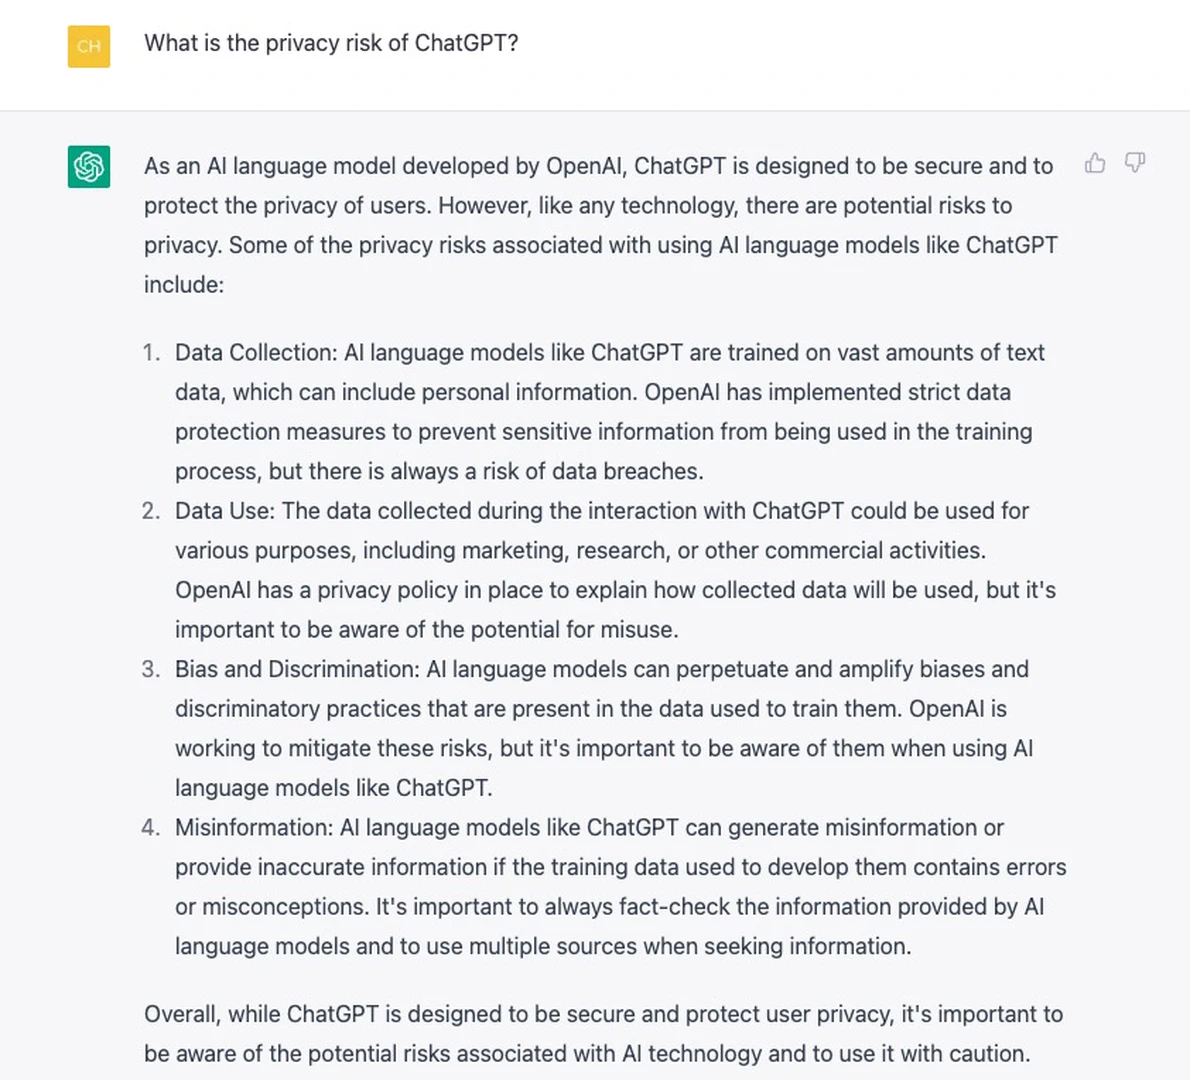 An answer to “What is the privacy risk of ChatGPT' by ChatGPT (Jan. 30, 2023 version).